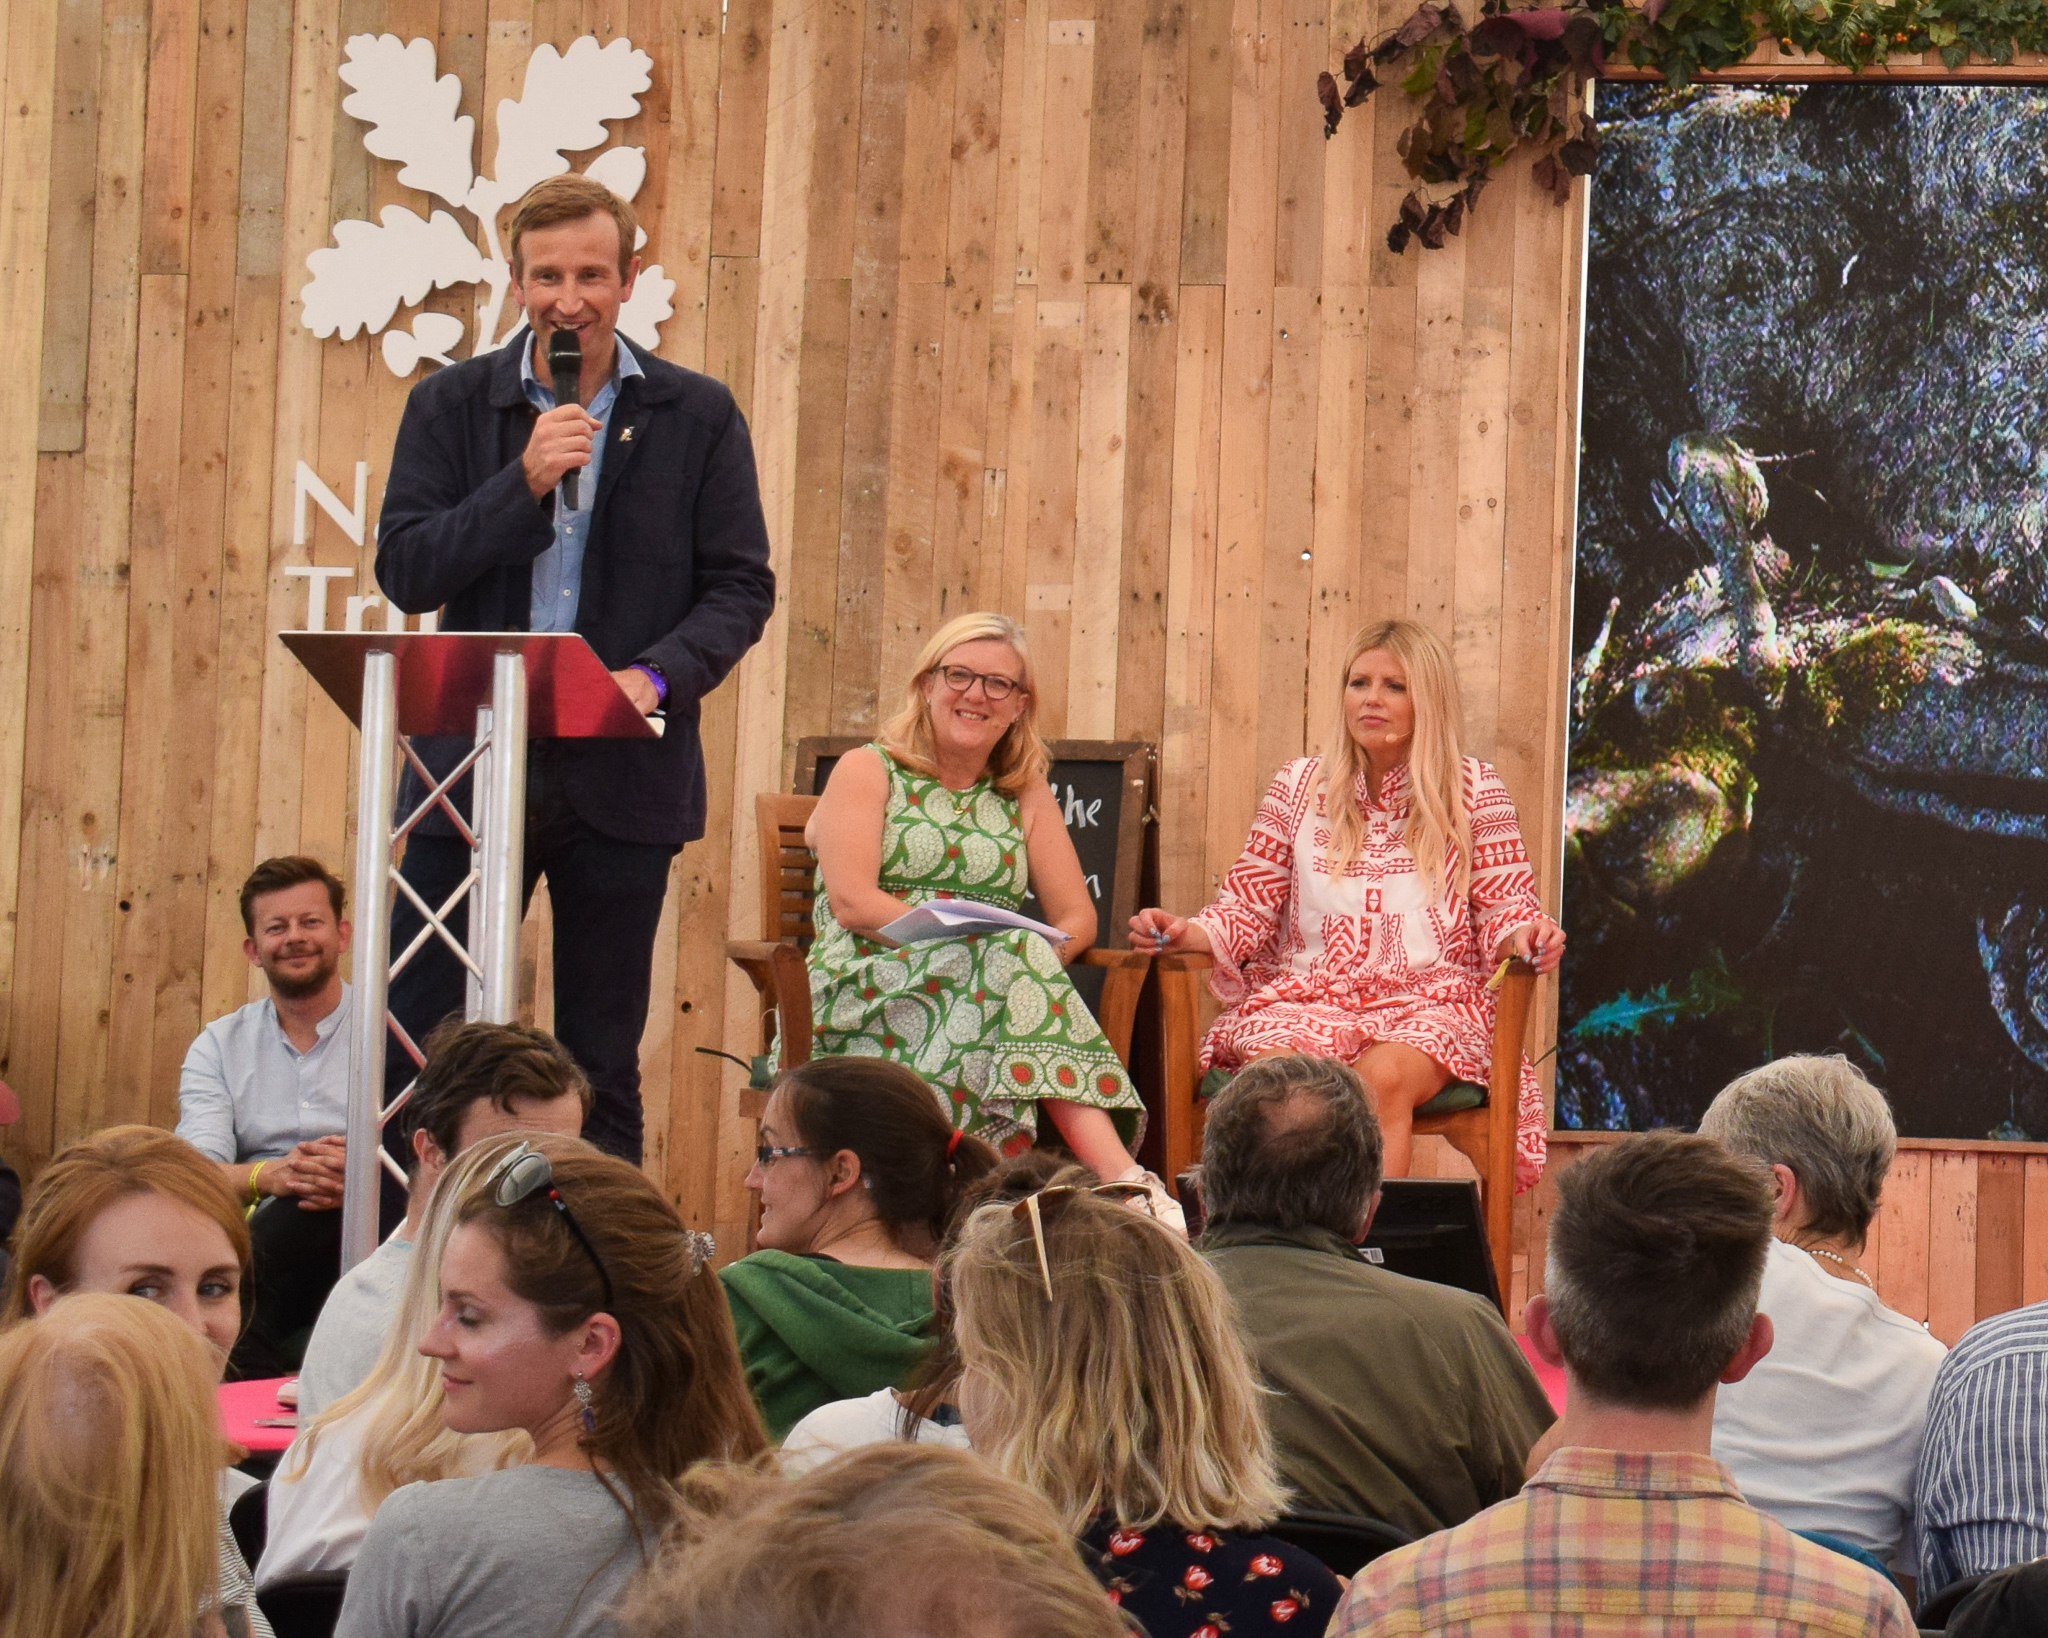 Rob Macfarlane wins the 2019 Wainwright Prize for Underland at Countryfile Live